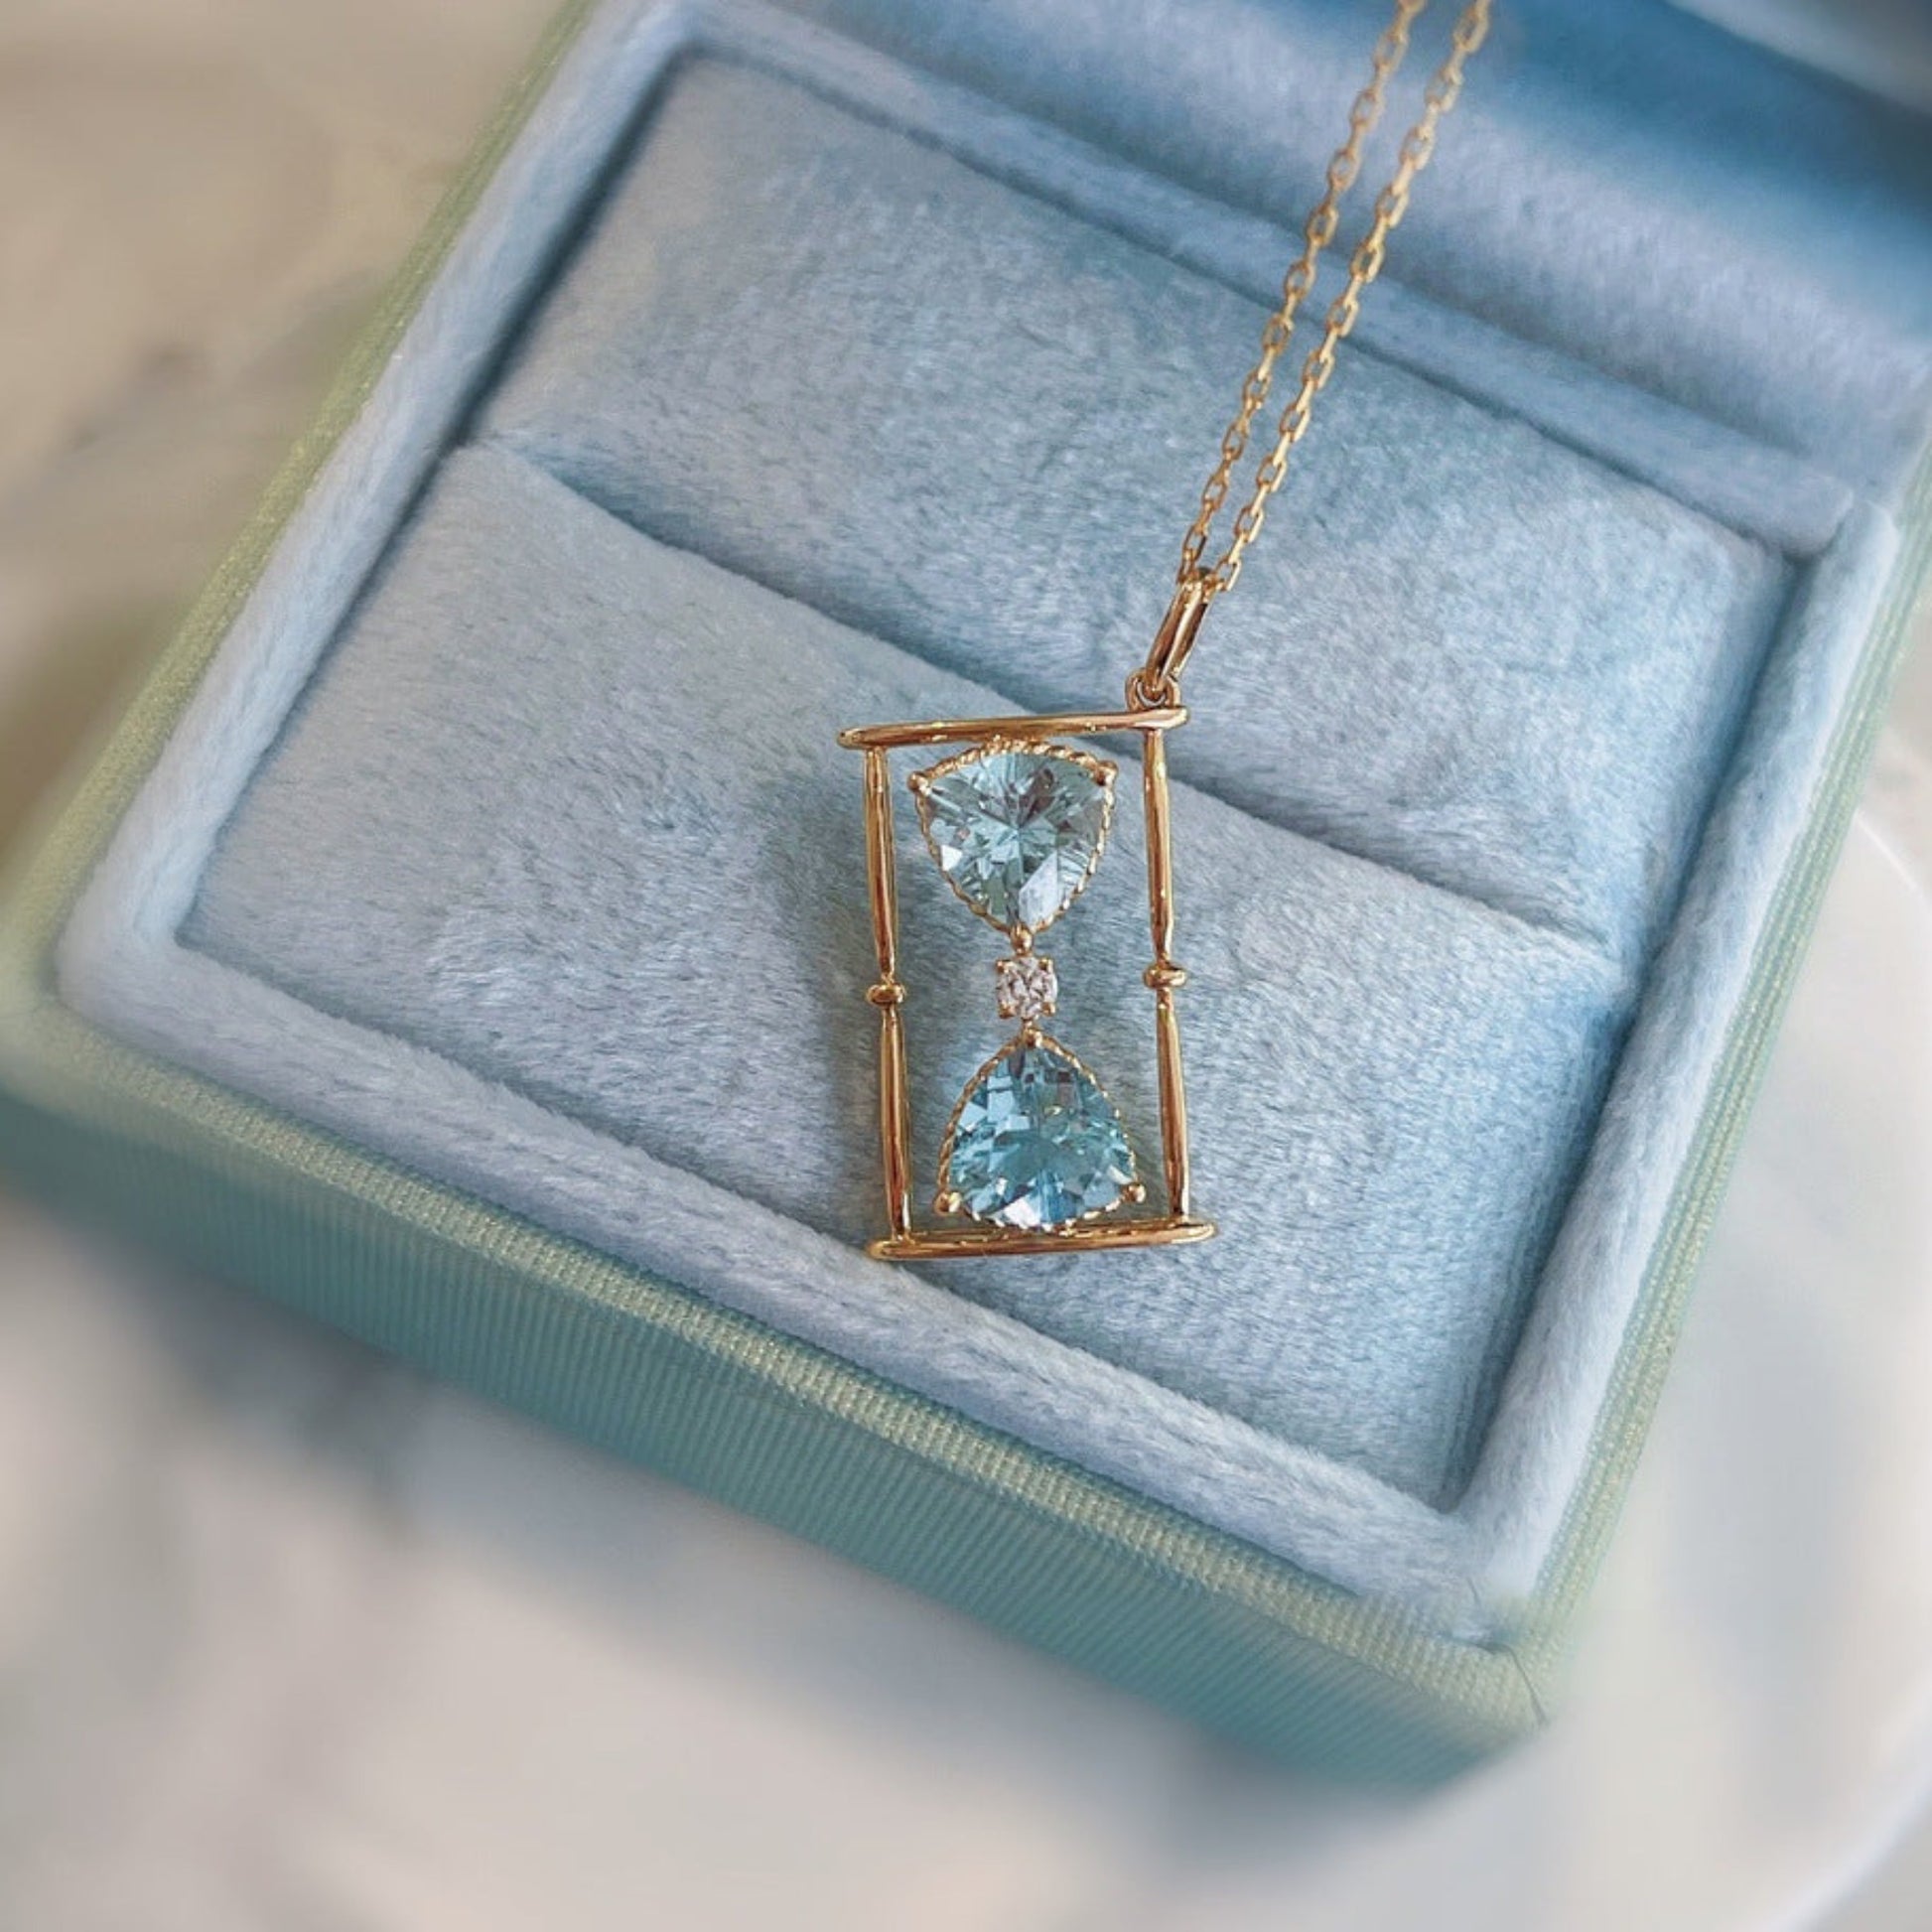 Hourglass Necklace close up in a blue gift box 